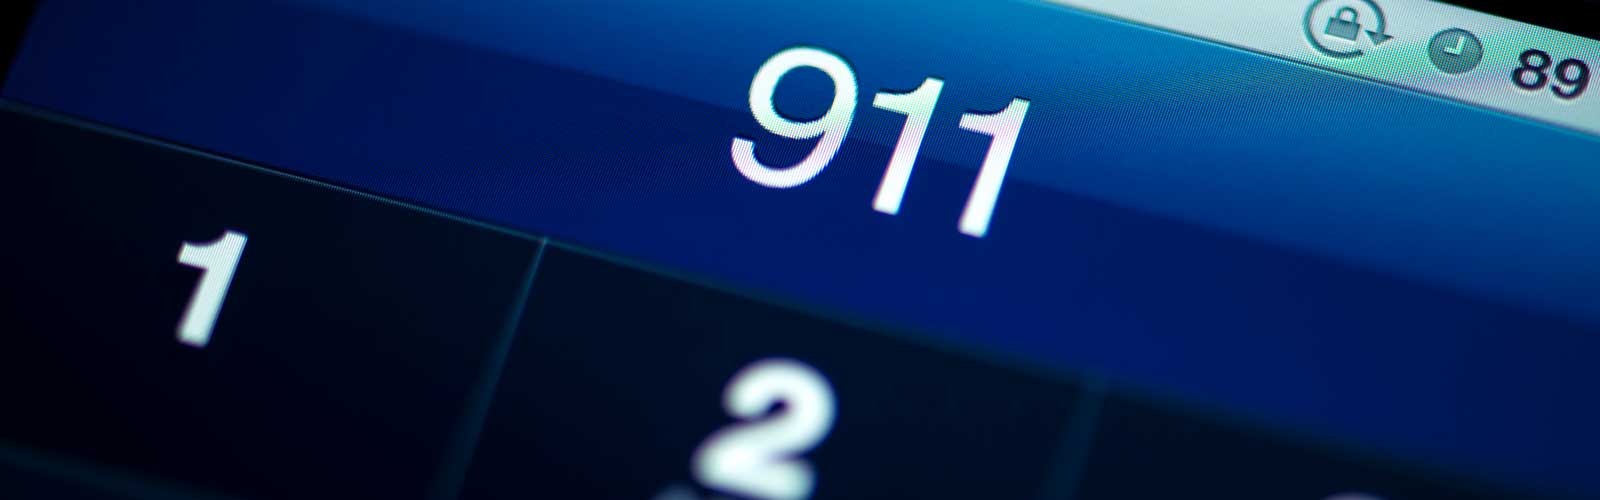 911 on mobile device